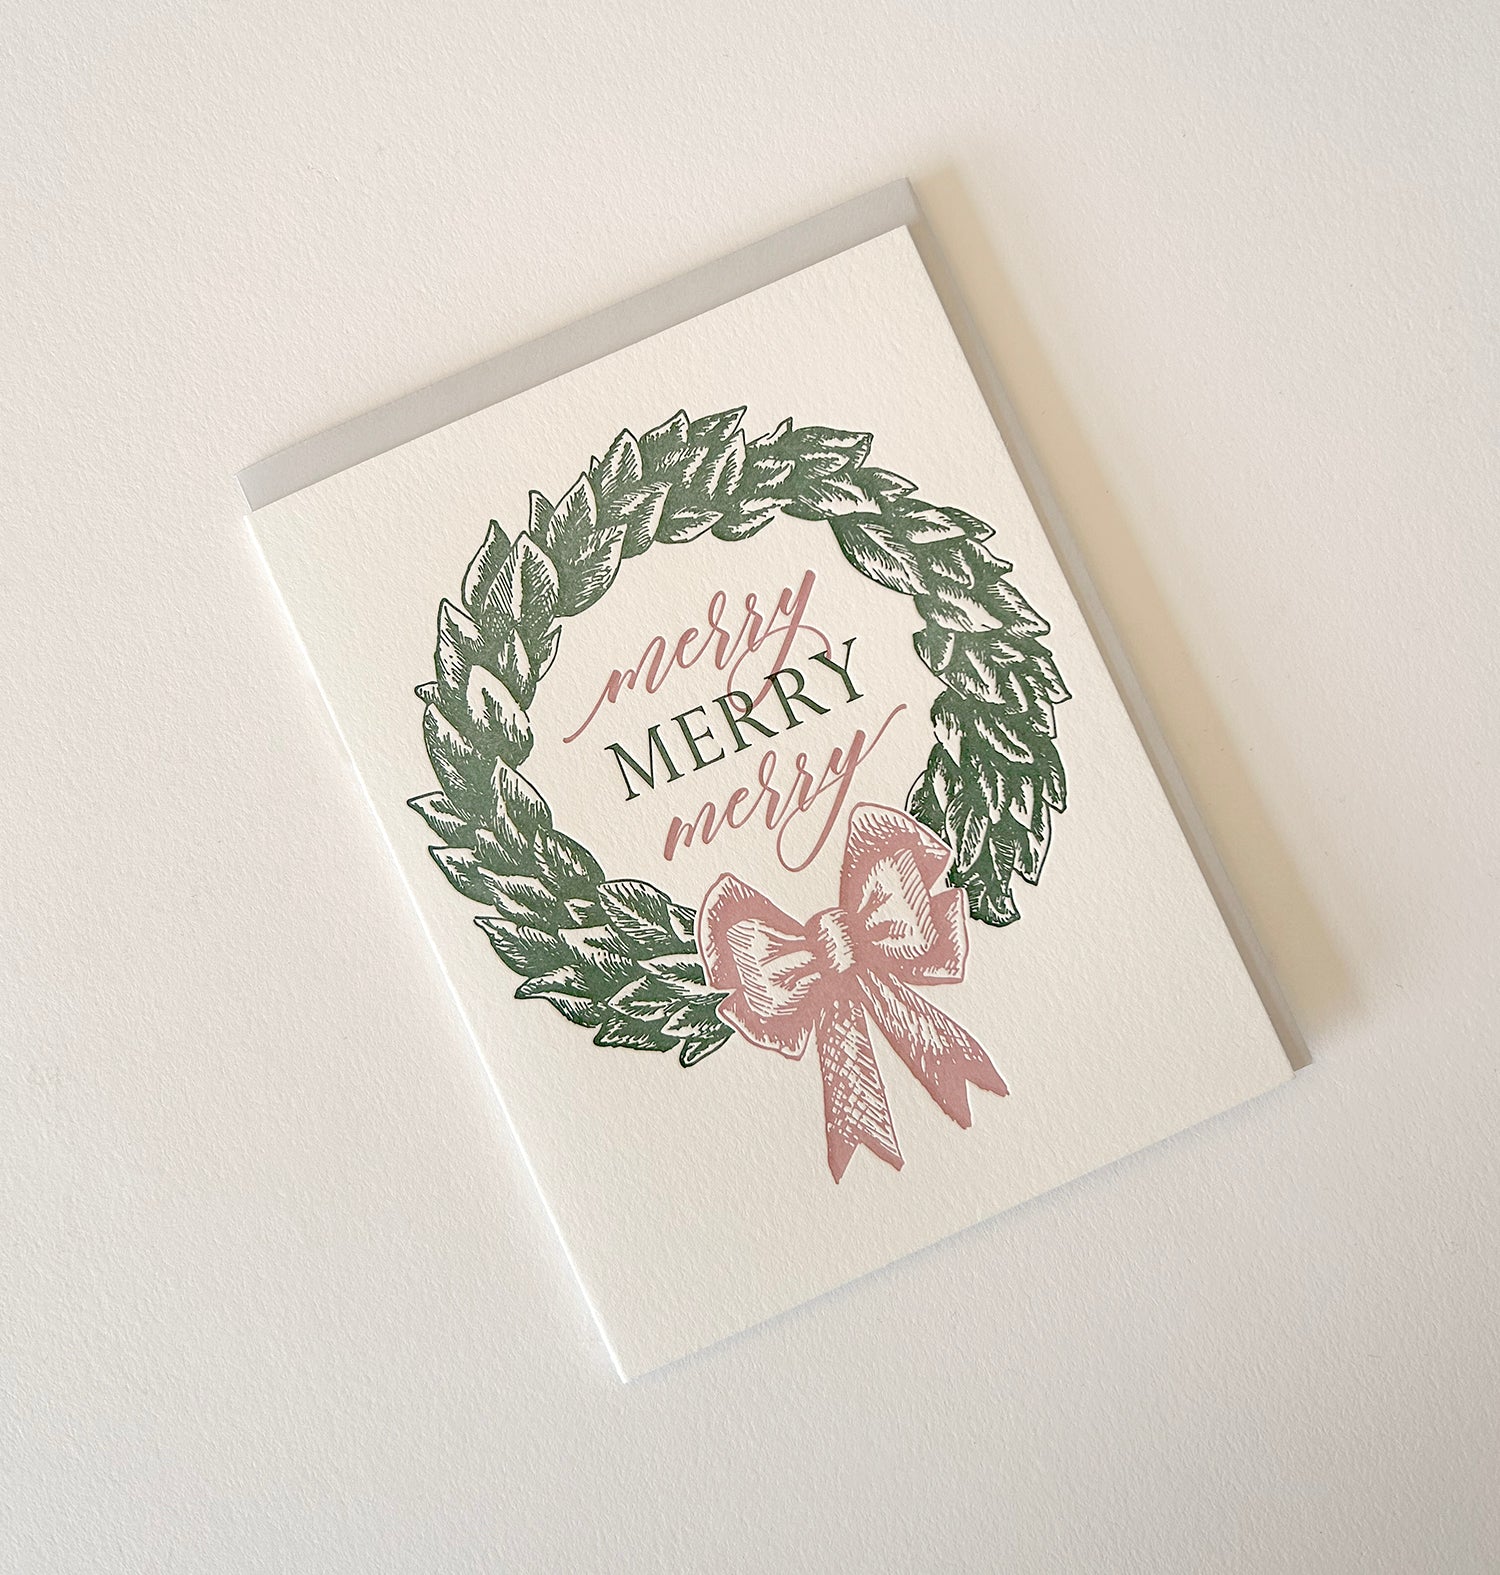 Letterpress holiday card with wreath that says "Merry merry merry" by Rust Belt Love